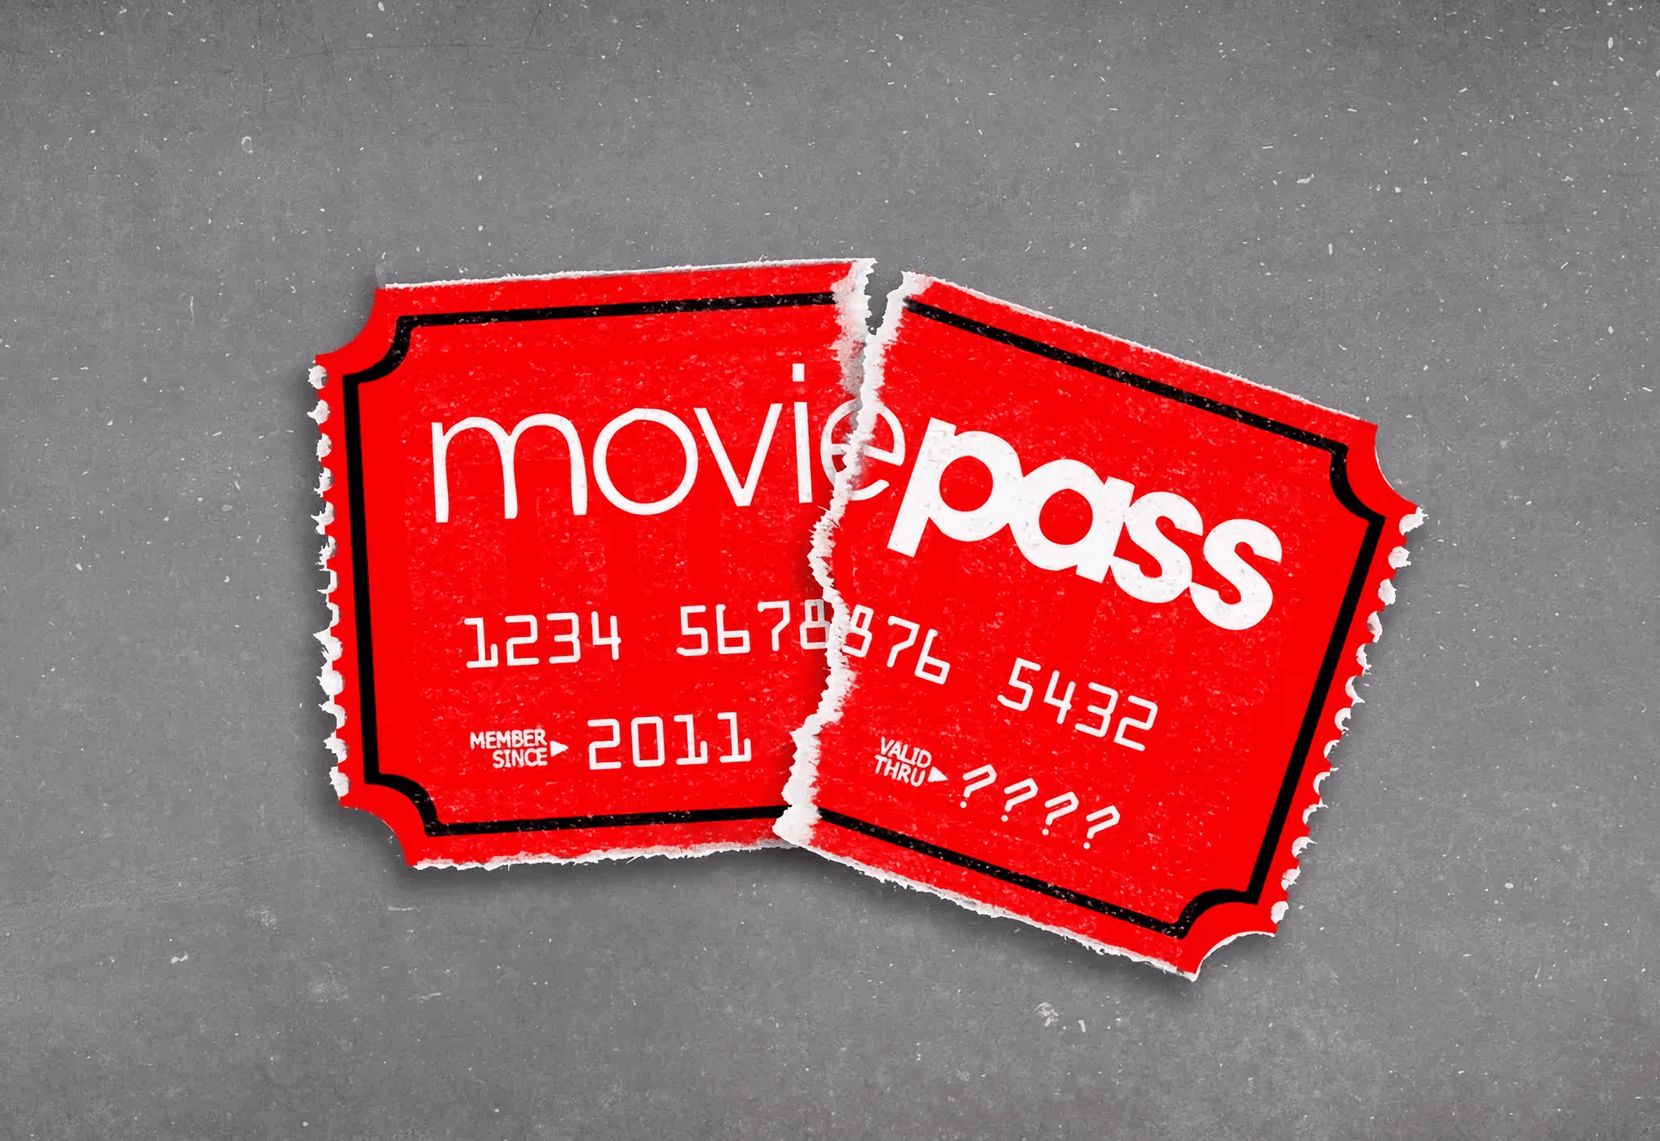 MoviePass and its parent company file for Chapter 7 bankruptcy